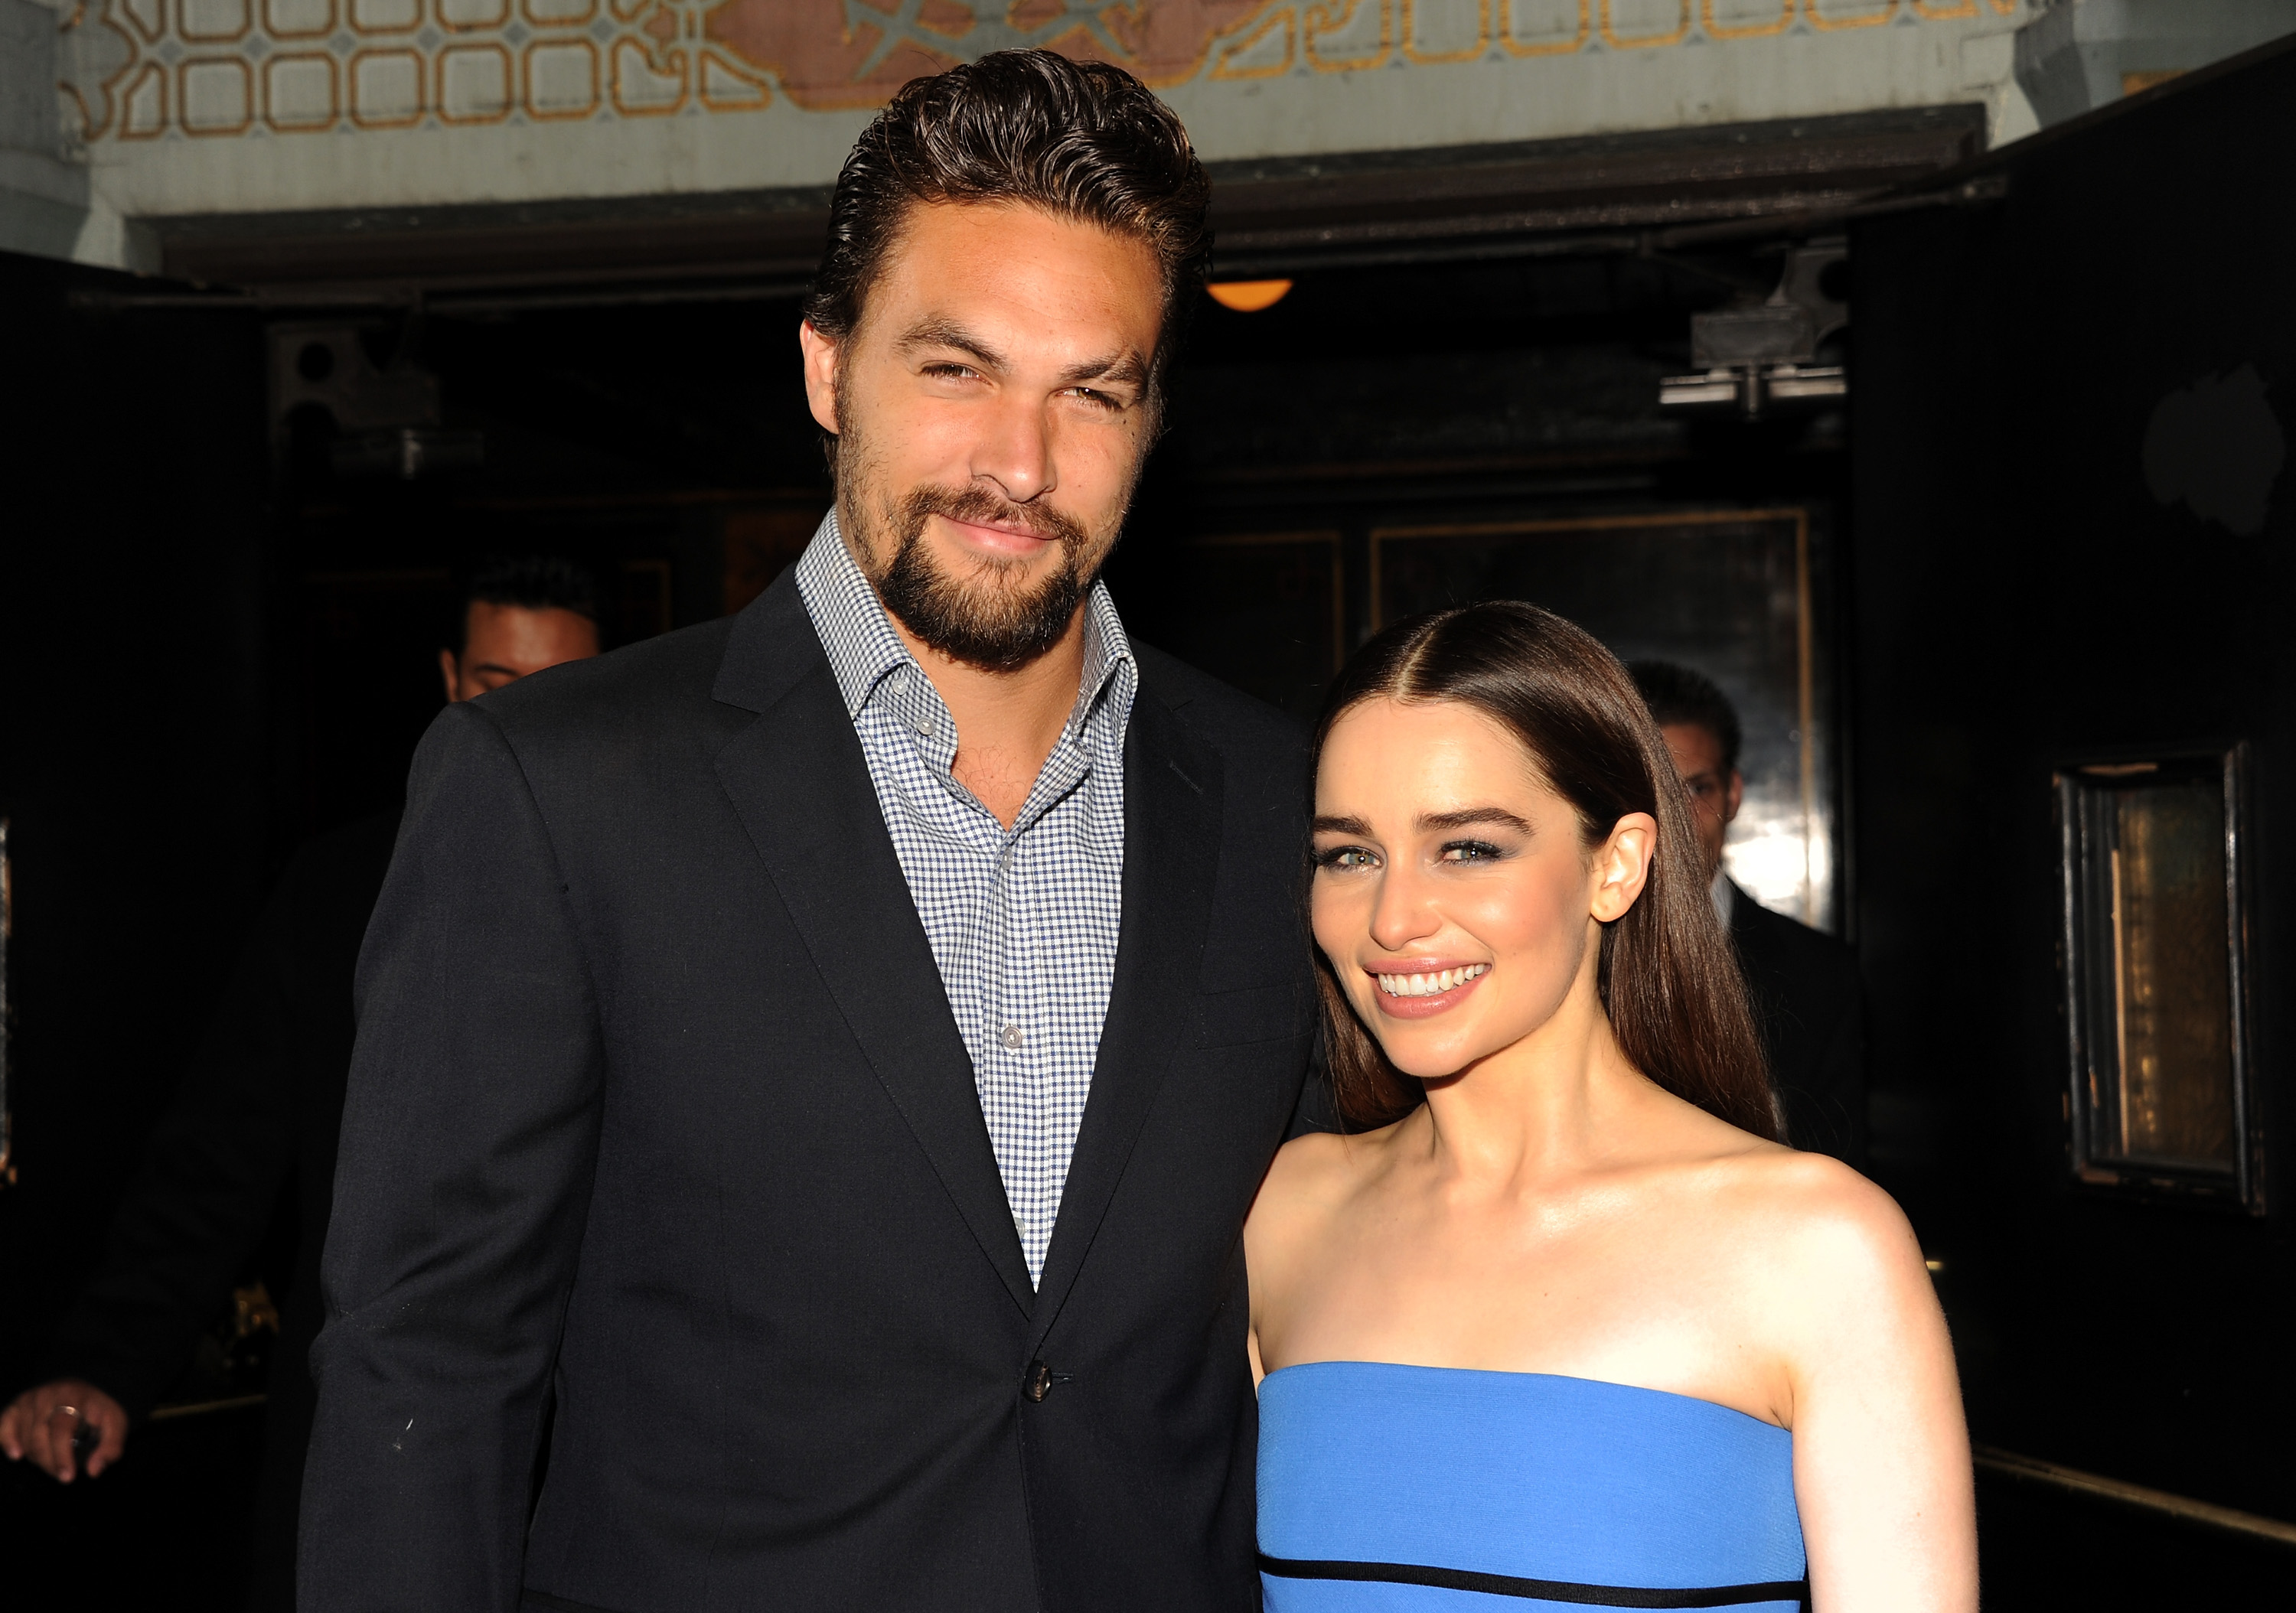 Jason Momoa and Emilia Clarke at the premiere for 'Game of Thrones' season 3.